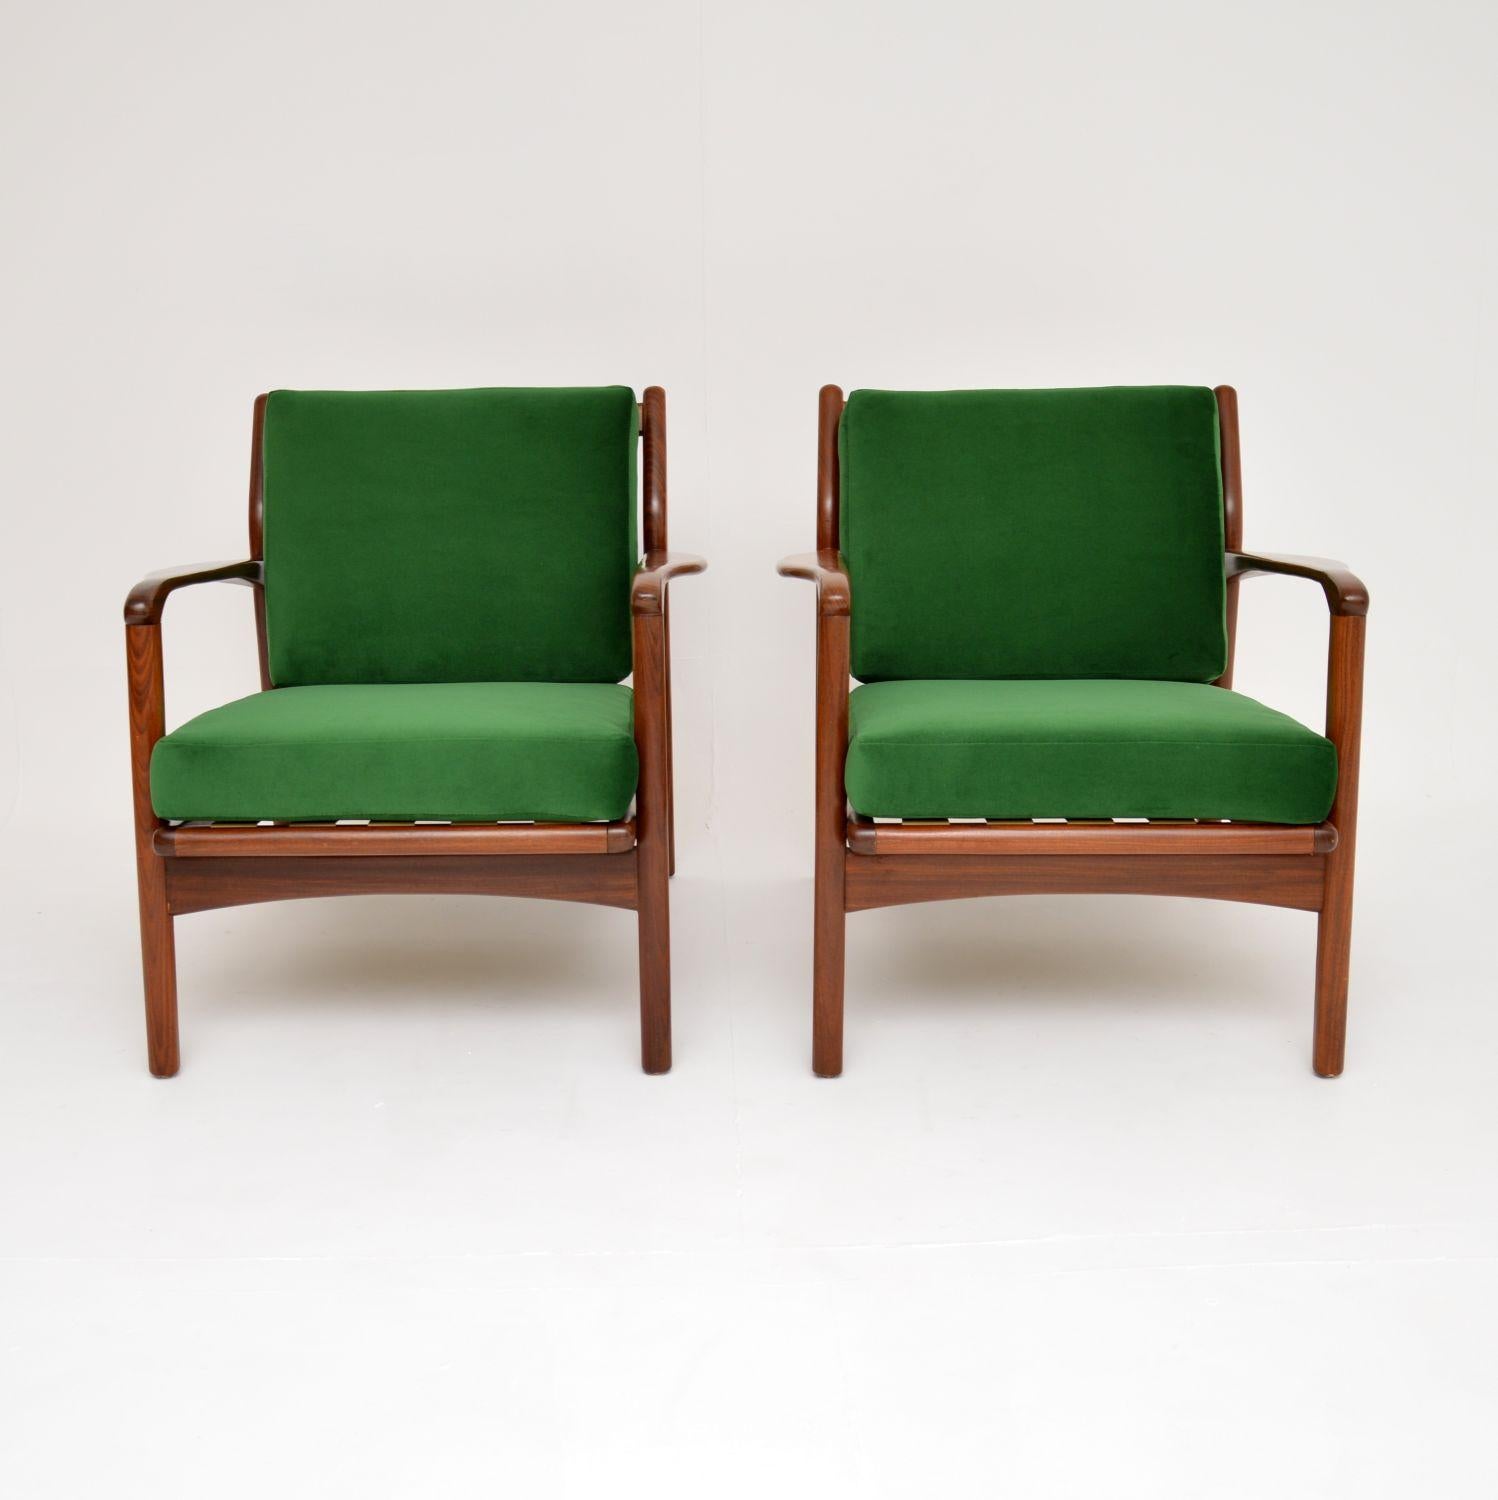 English 1960's Pair of Vintage Afromosia Armchairs by Toothill